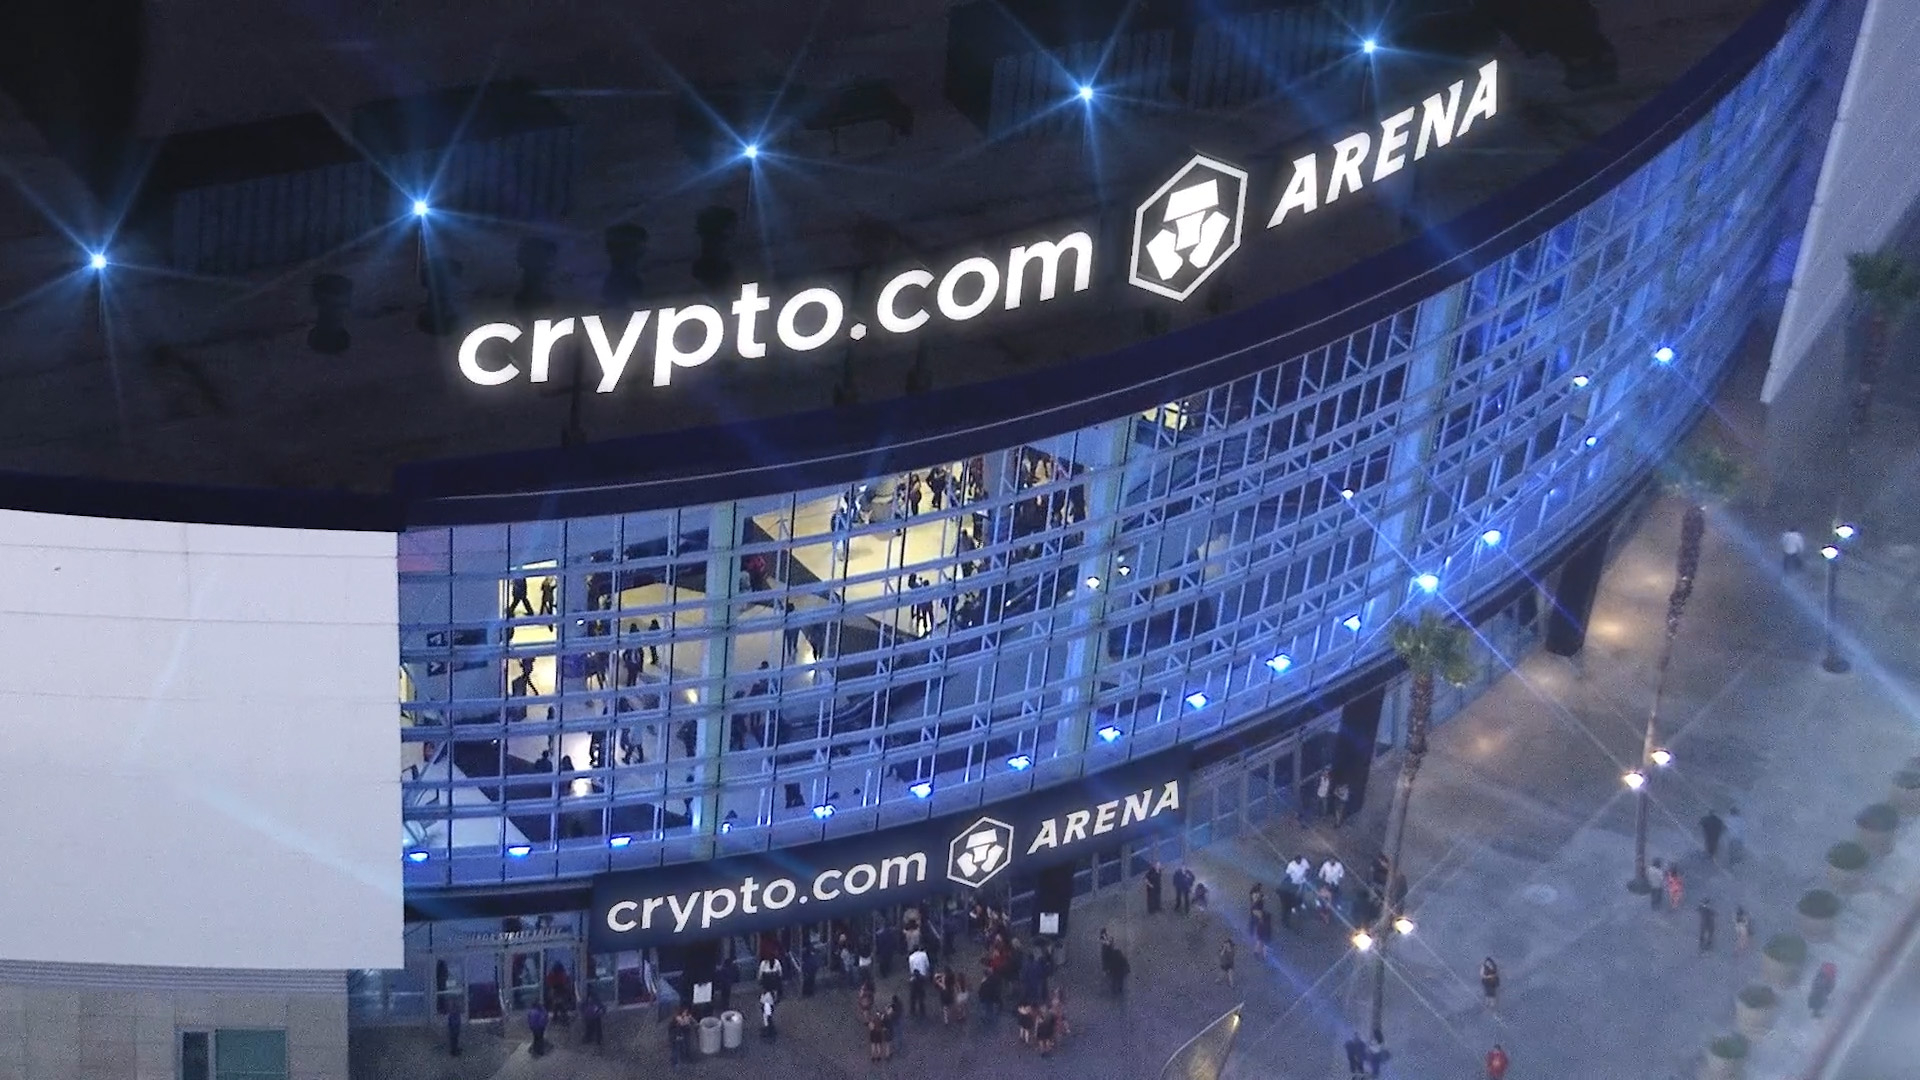 Fly-through animation #2 of Crypto.com Arena upgrades and renovations highlights.